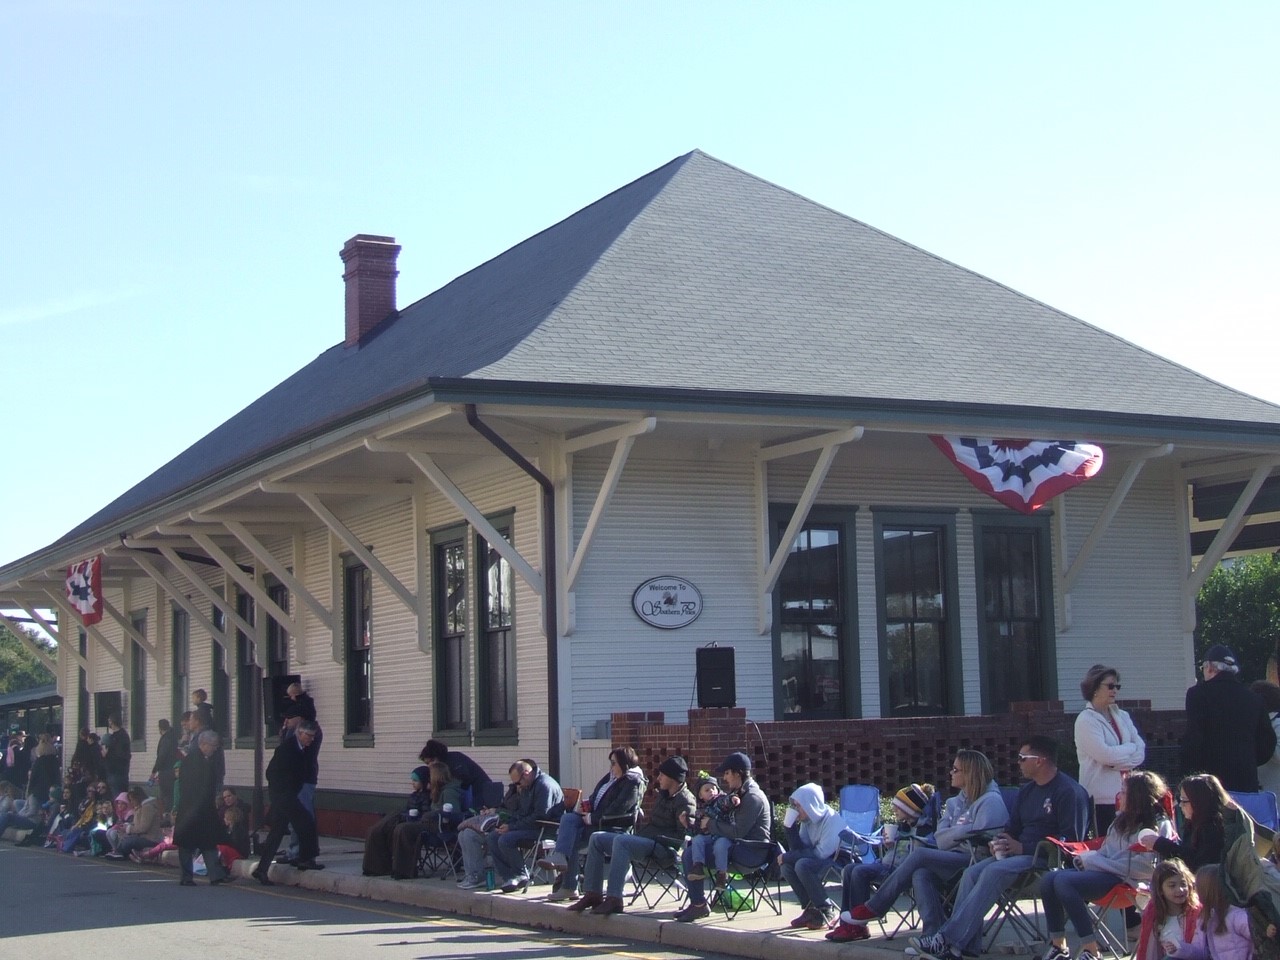 Crowd in front of the Southern Pines depot for a parade.